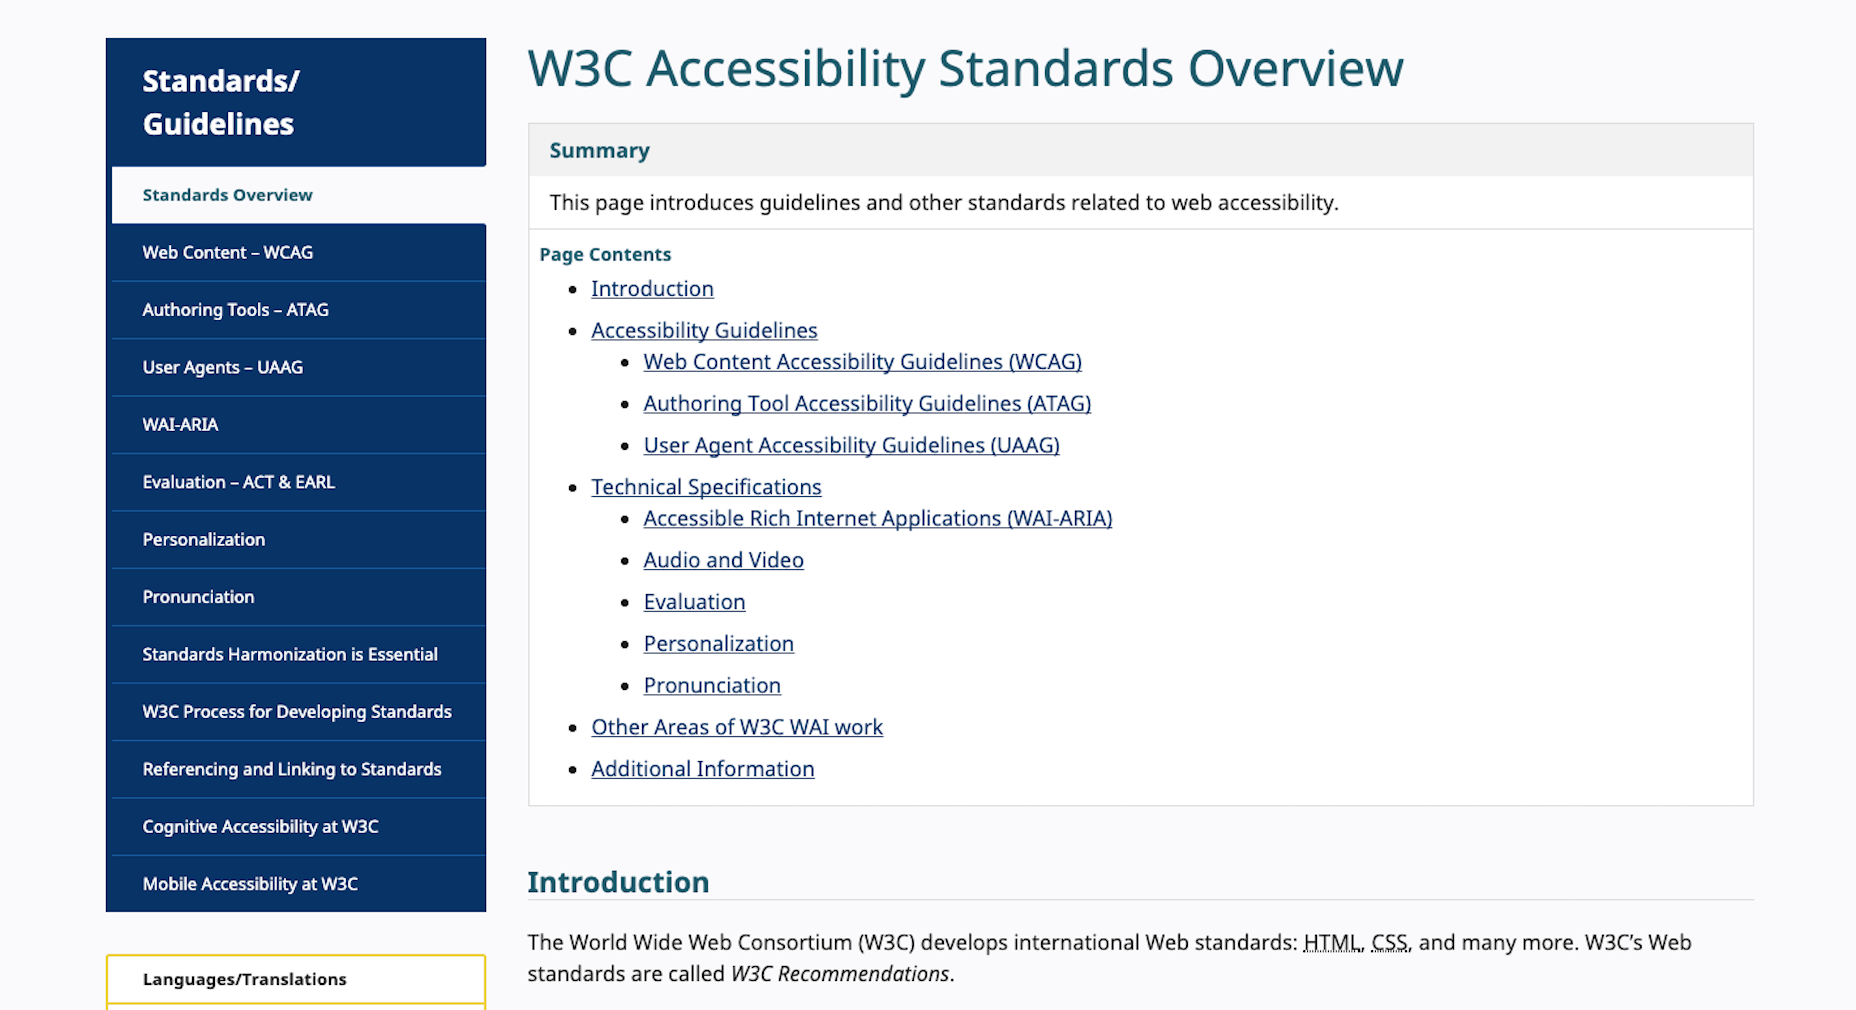 W3C Accessibility Standards